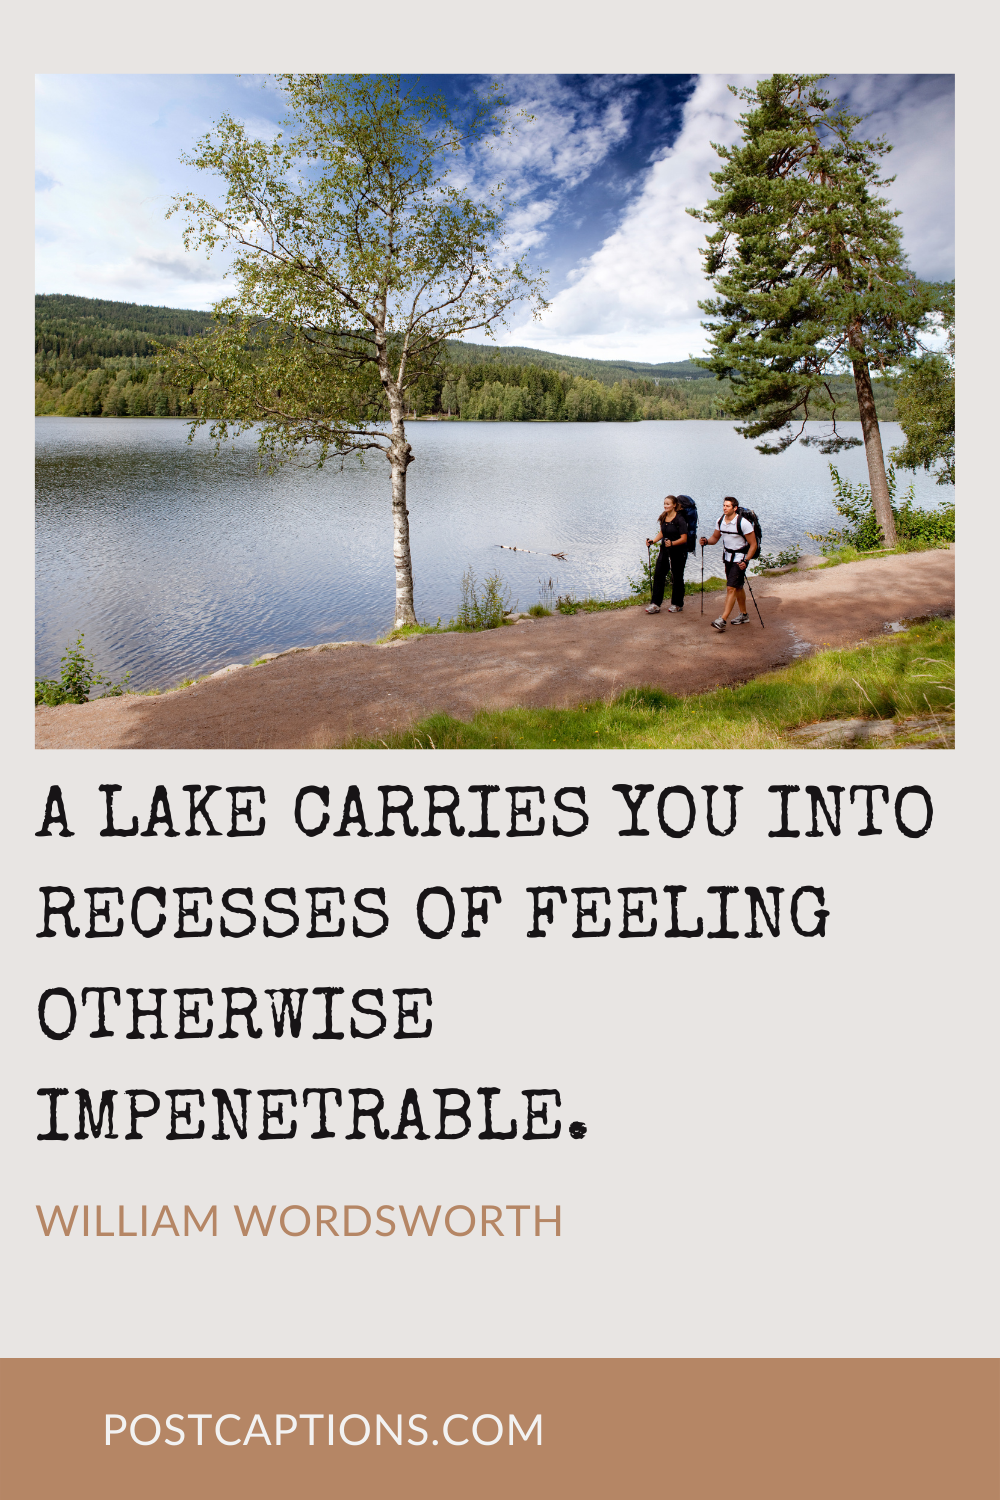 Lake quotes for Instagram